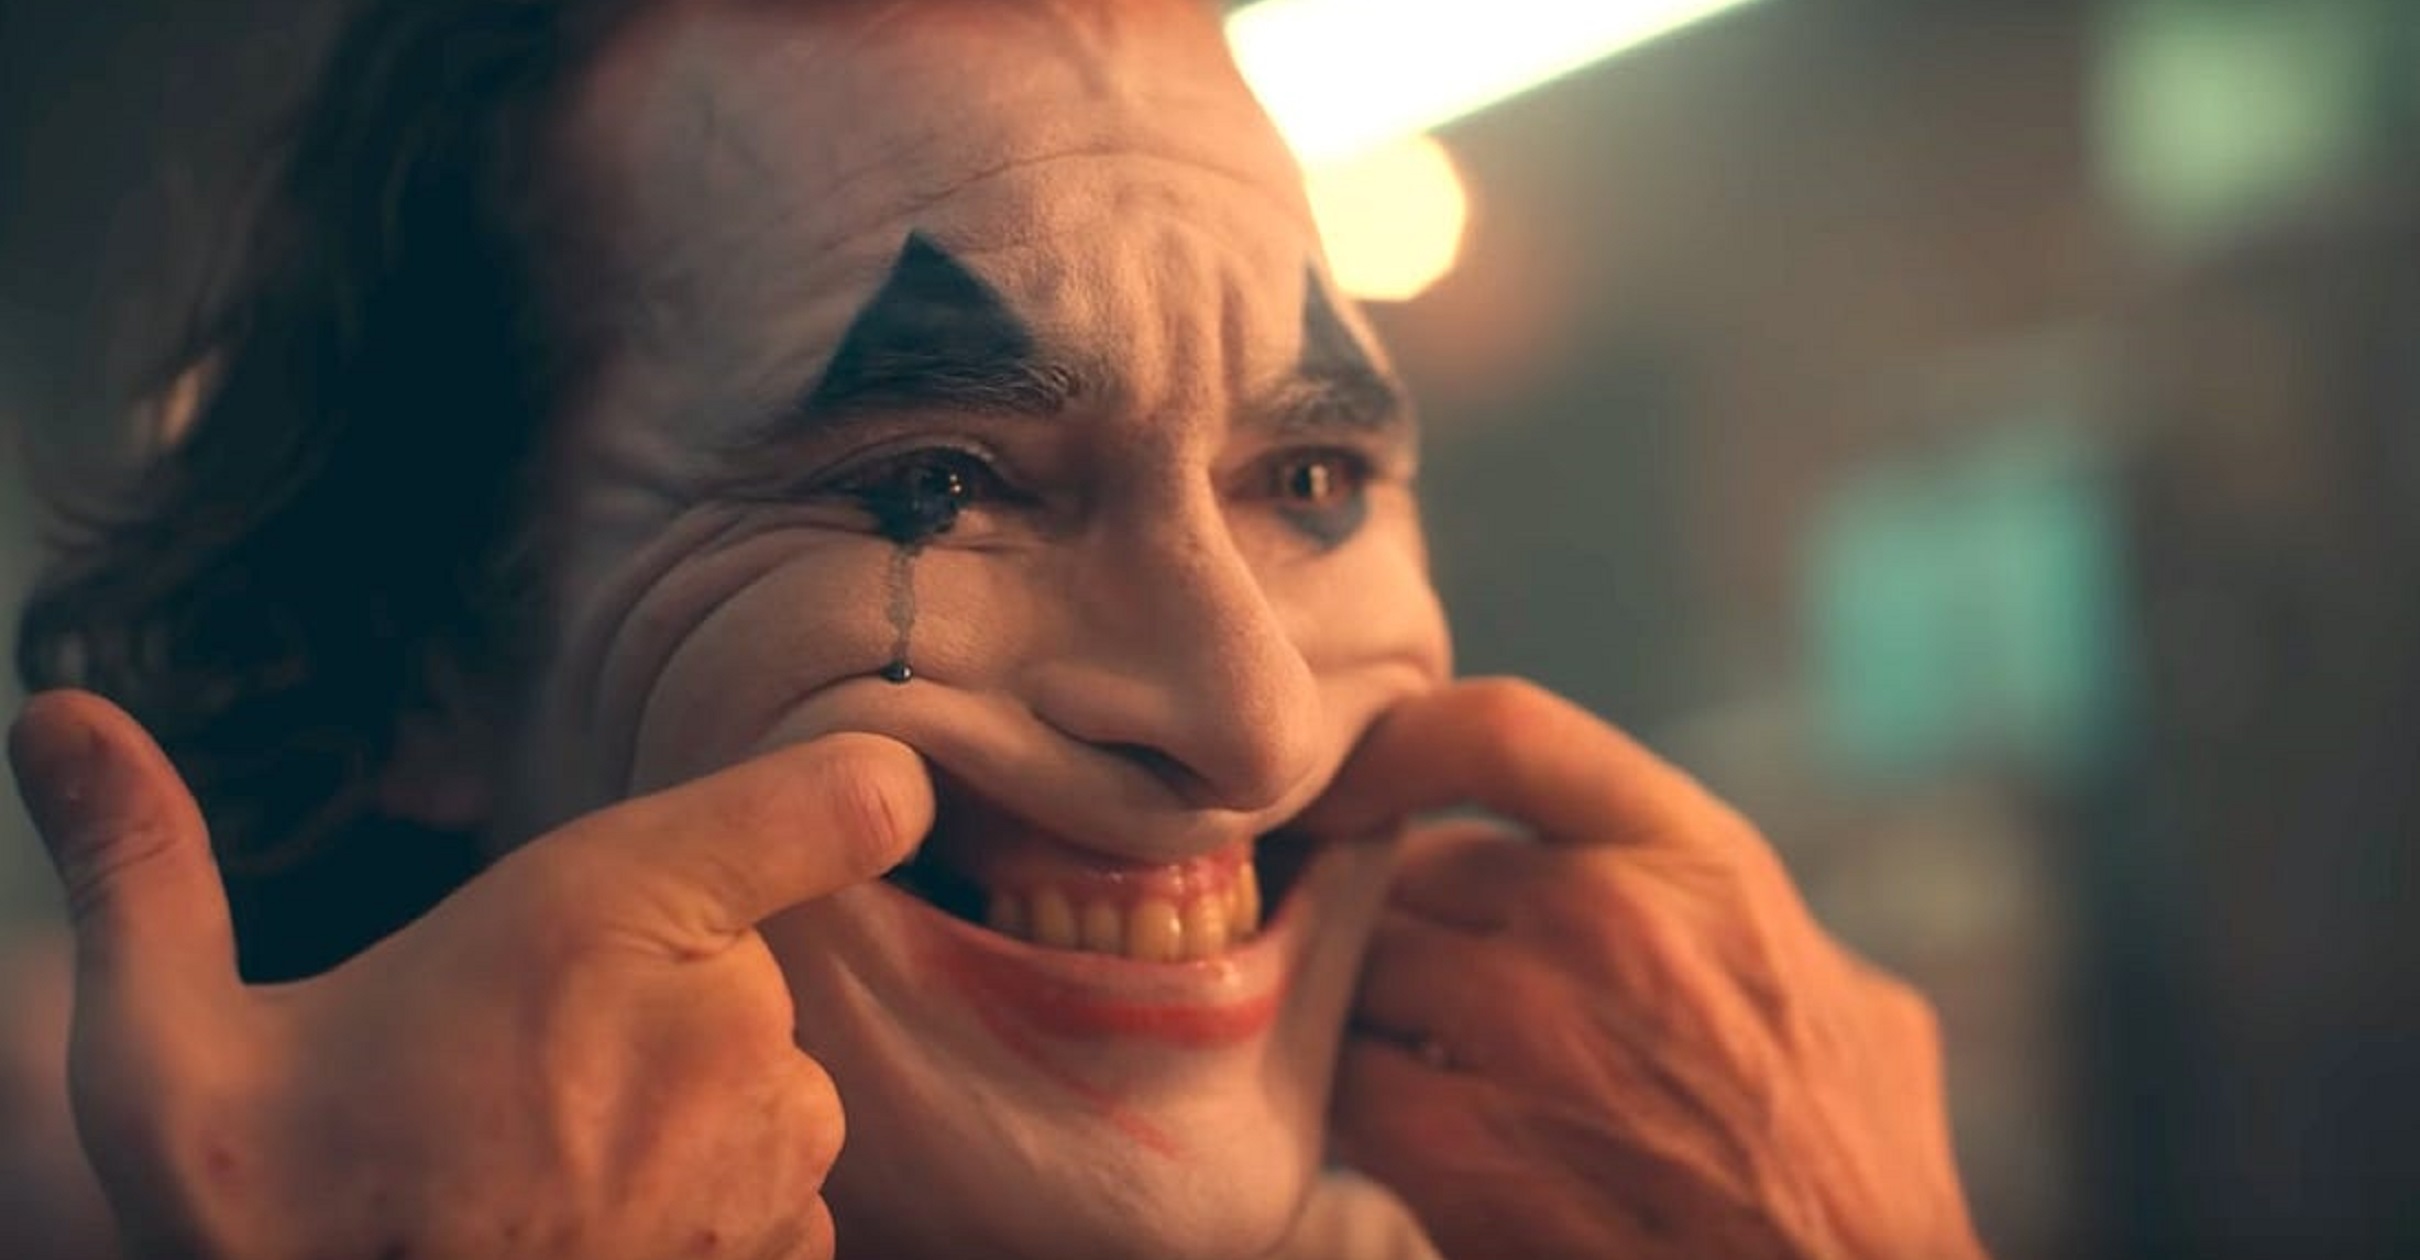 Confirmed: ‘Joker’ Will Be Back With a Sequel, Says Director